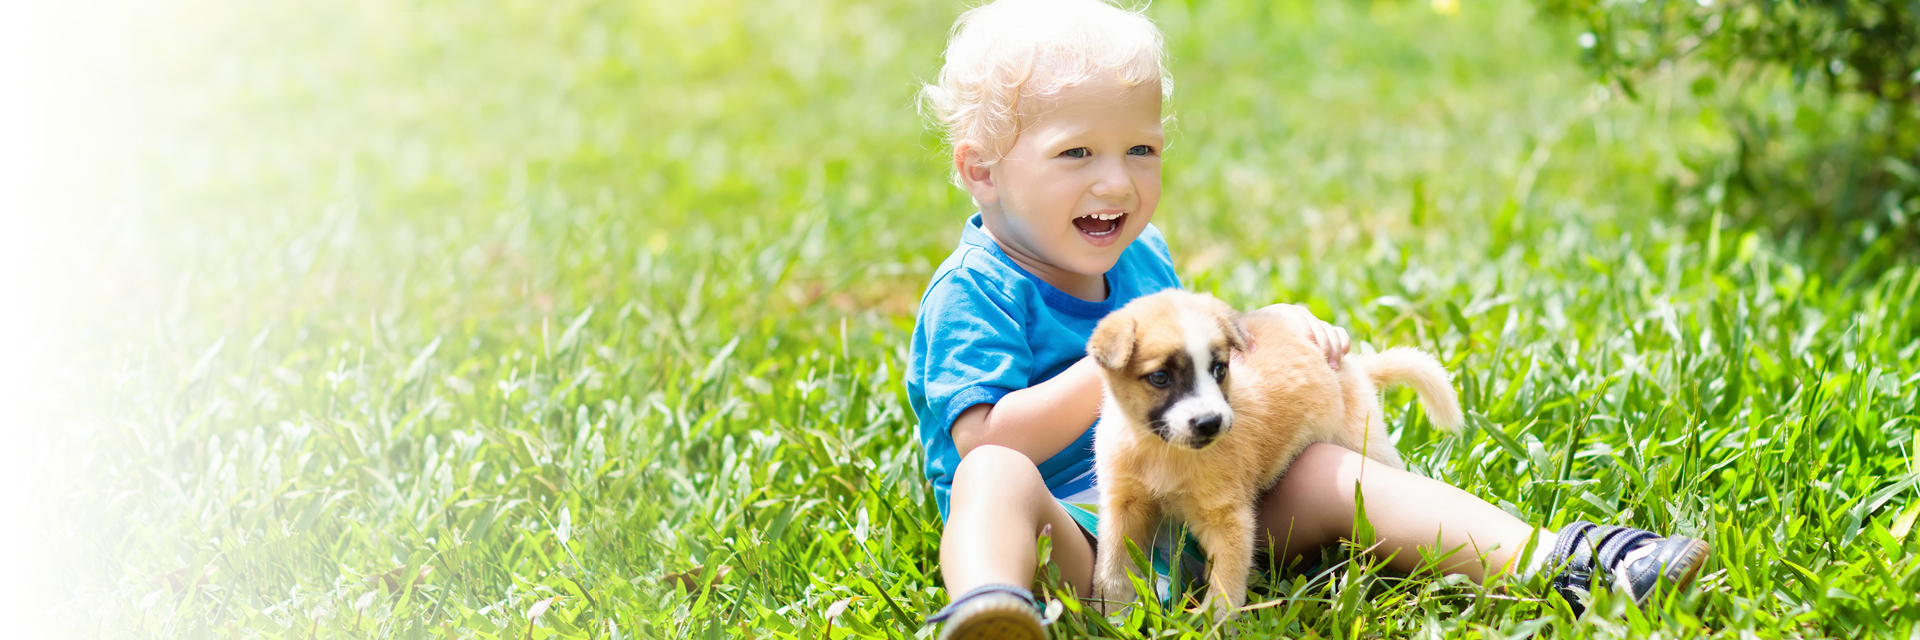 Little boy outdoors playing with puppy